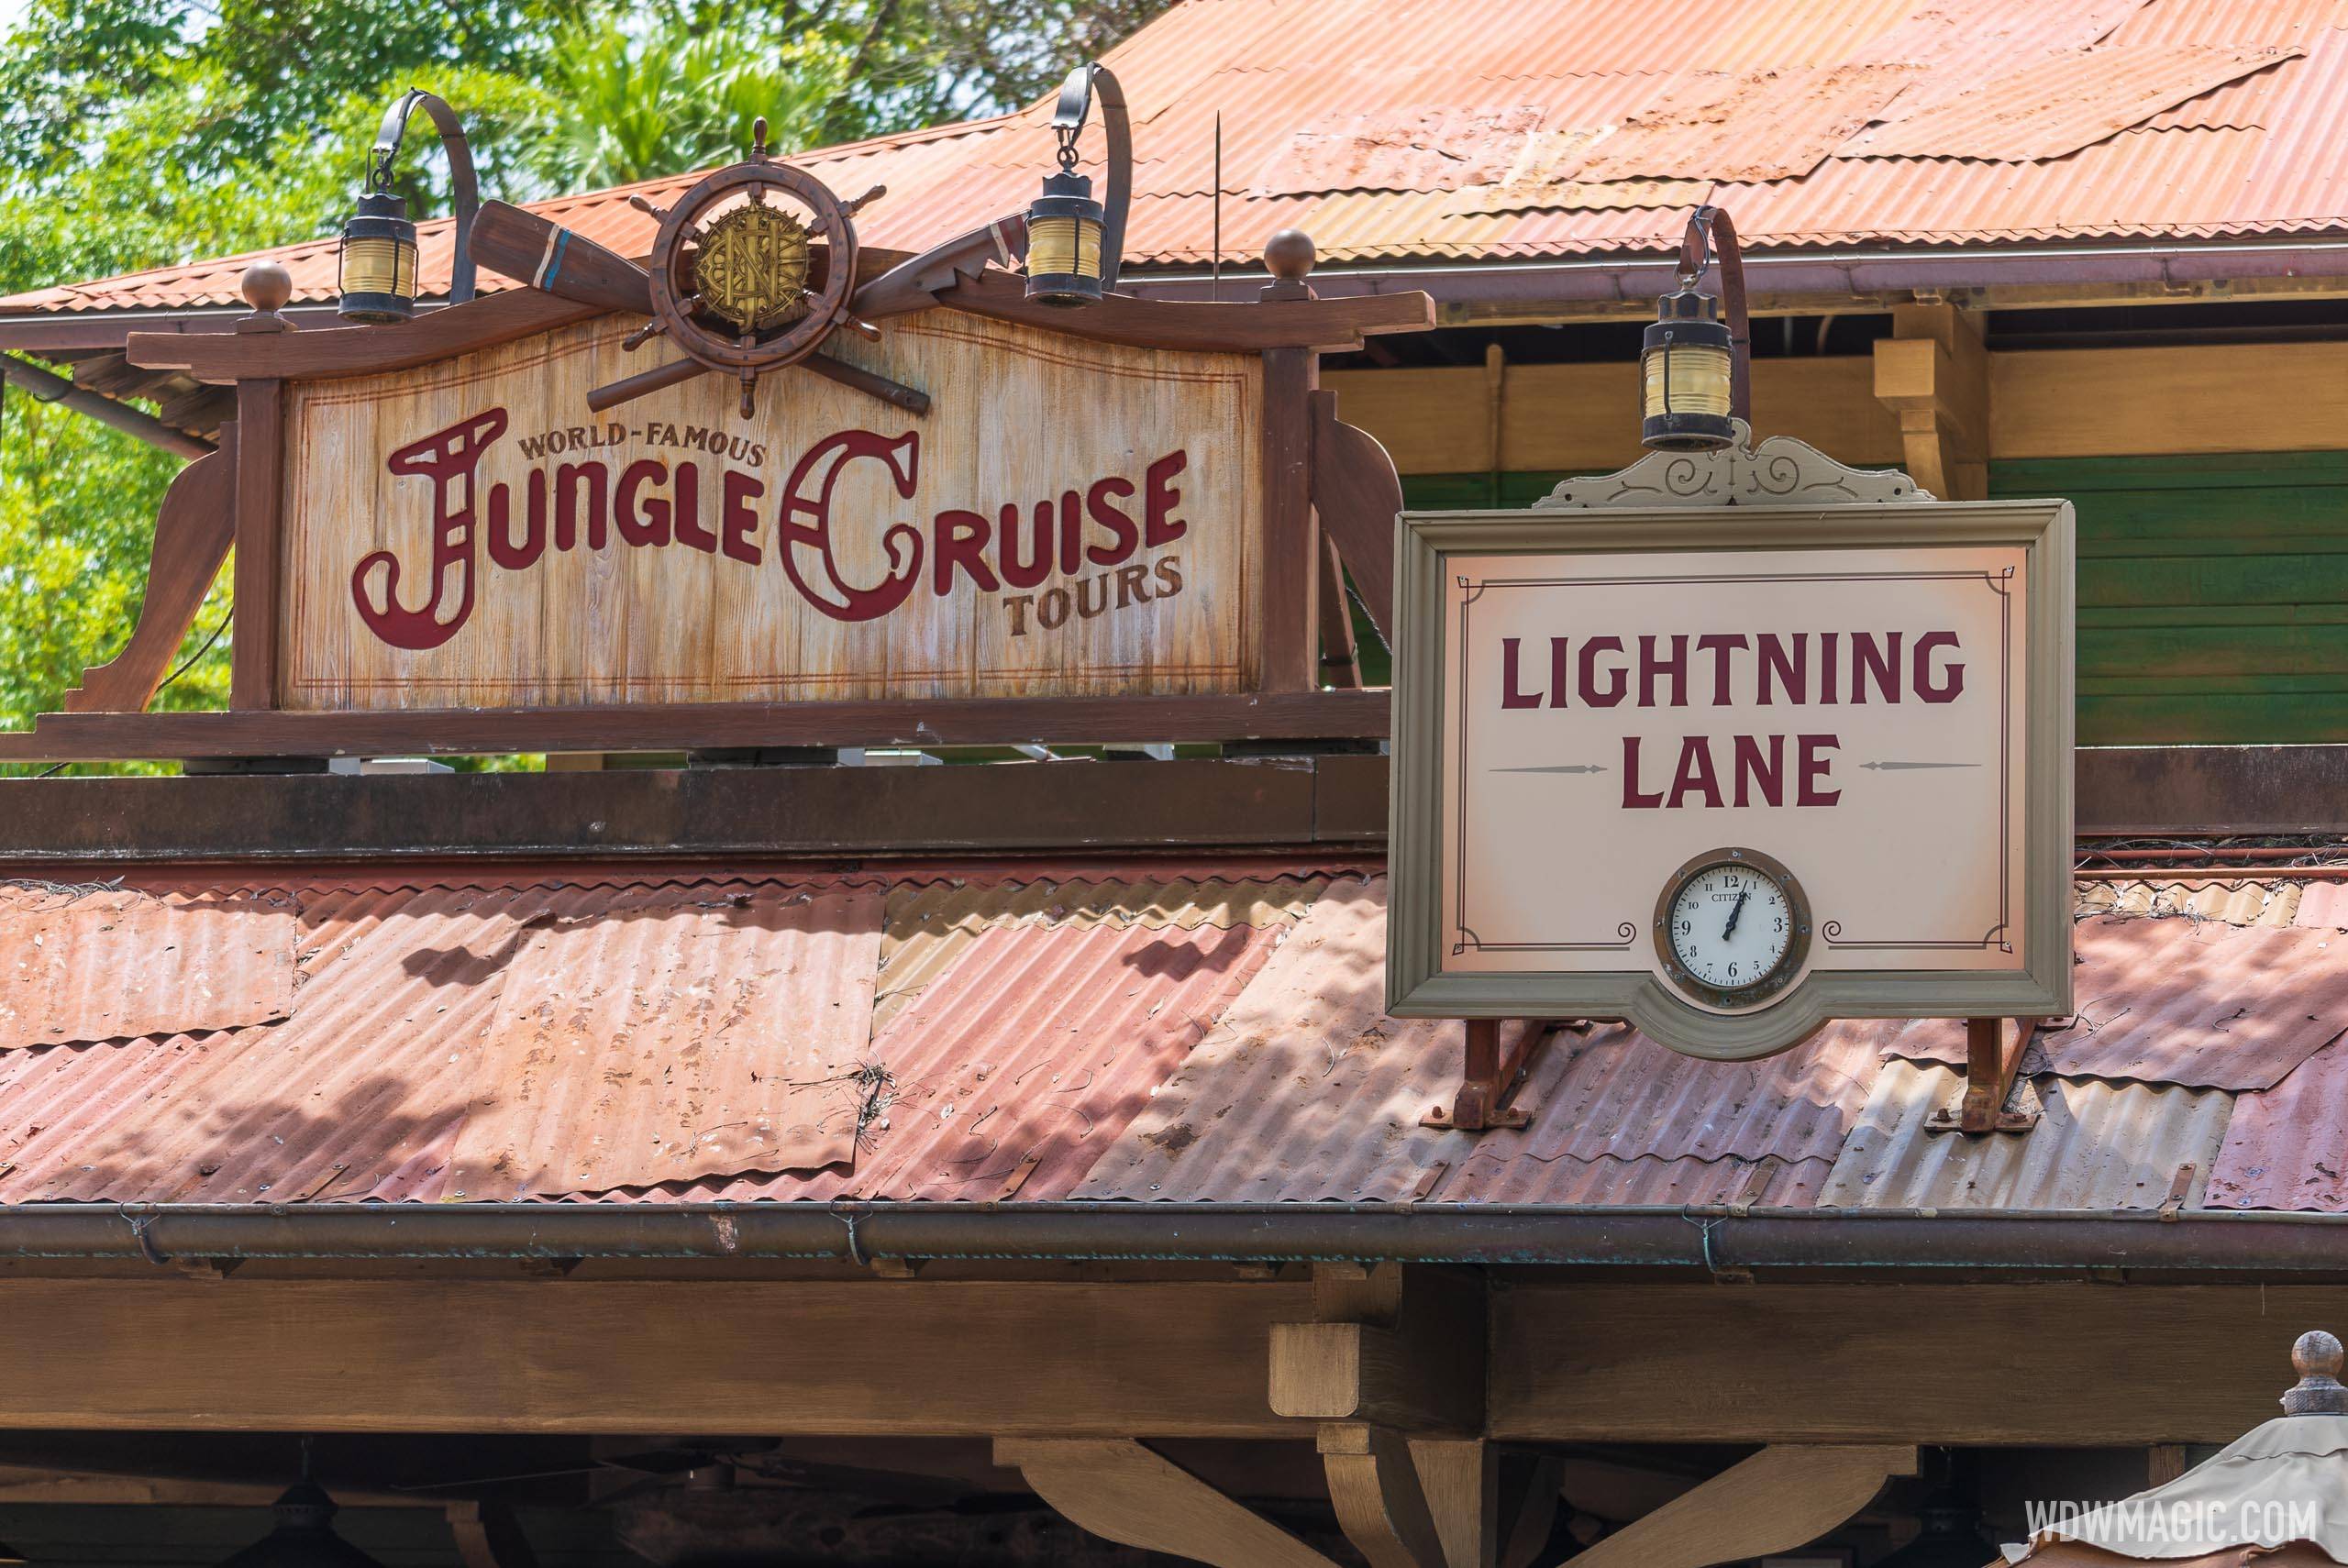 Lightning Lane access via Genie+ with cost $29 per per person this weekend at Walt Disney World